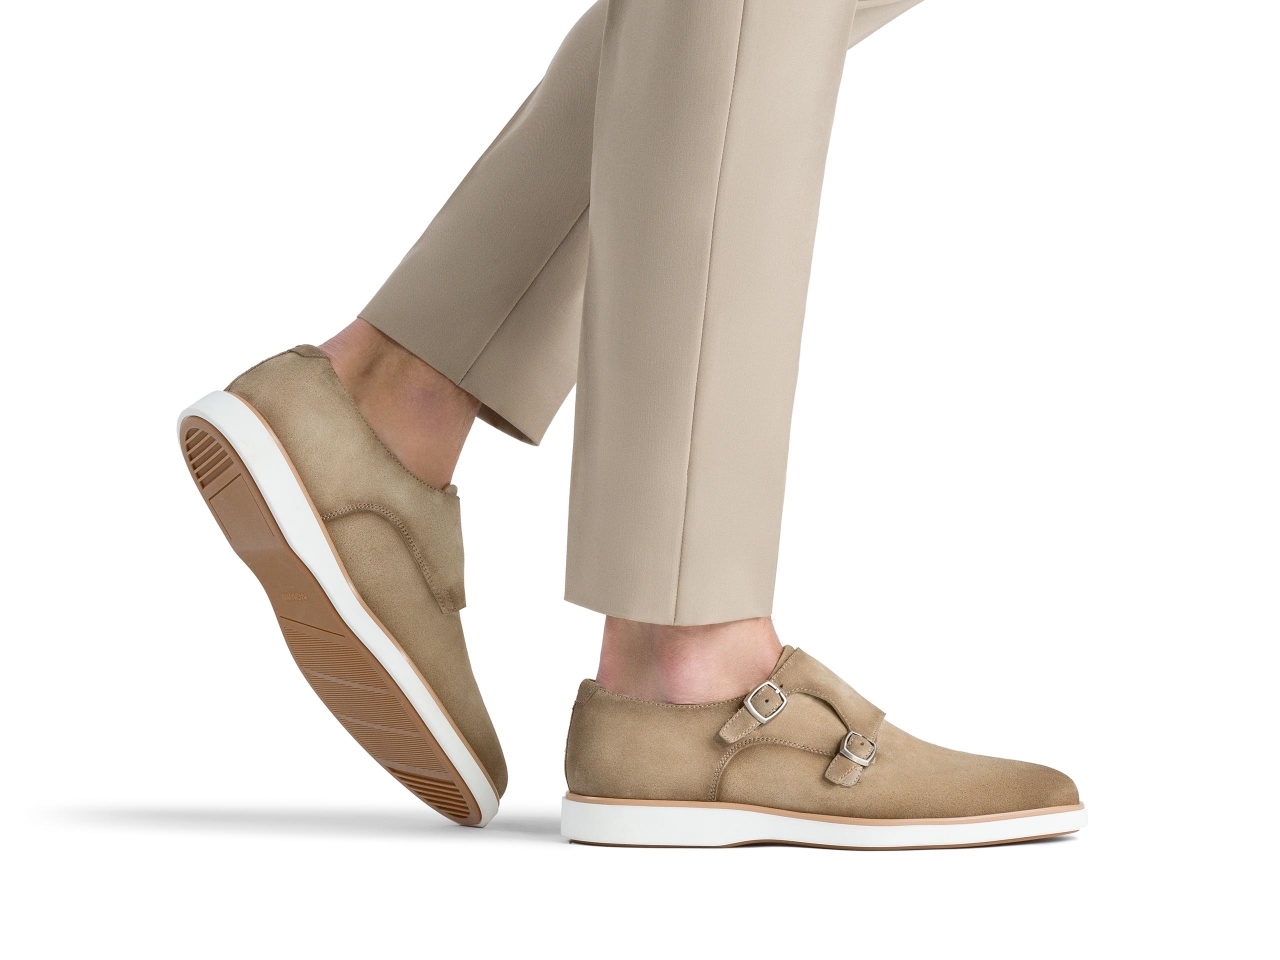 The Lucca Cream Suede pairs well with light khaki pants